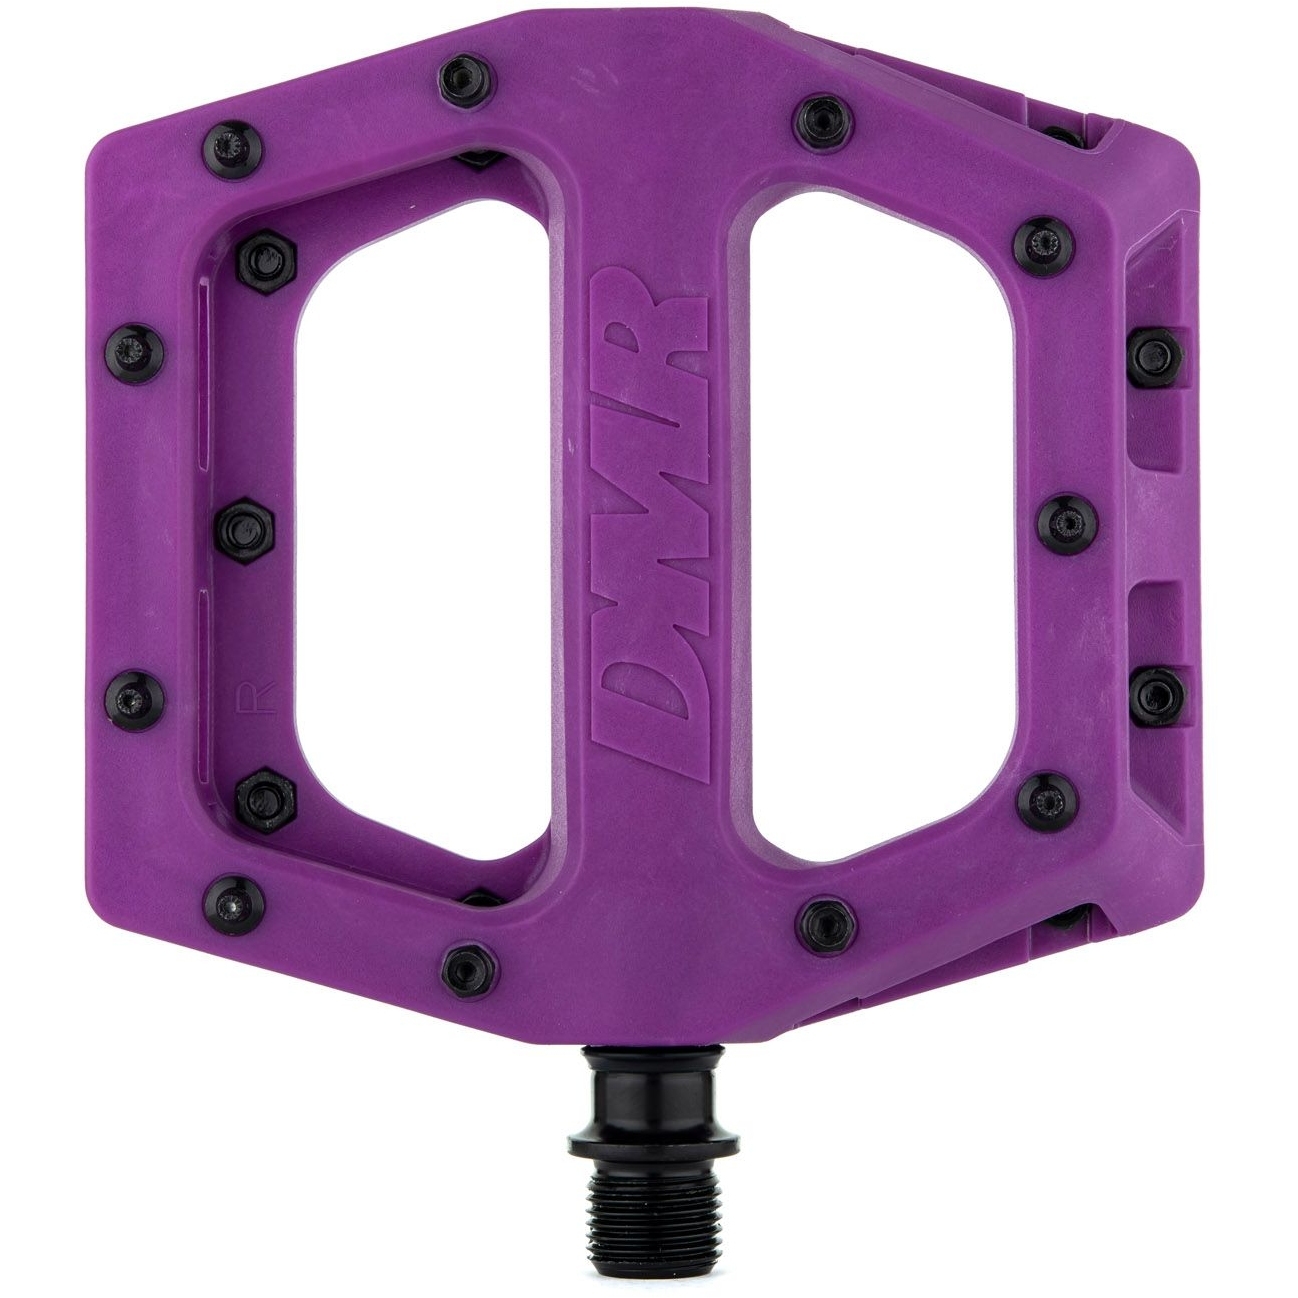 Picture of DMR V11 Flat Pedals - purple